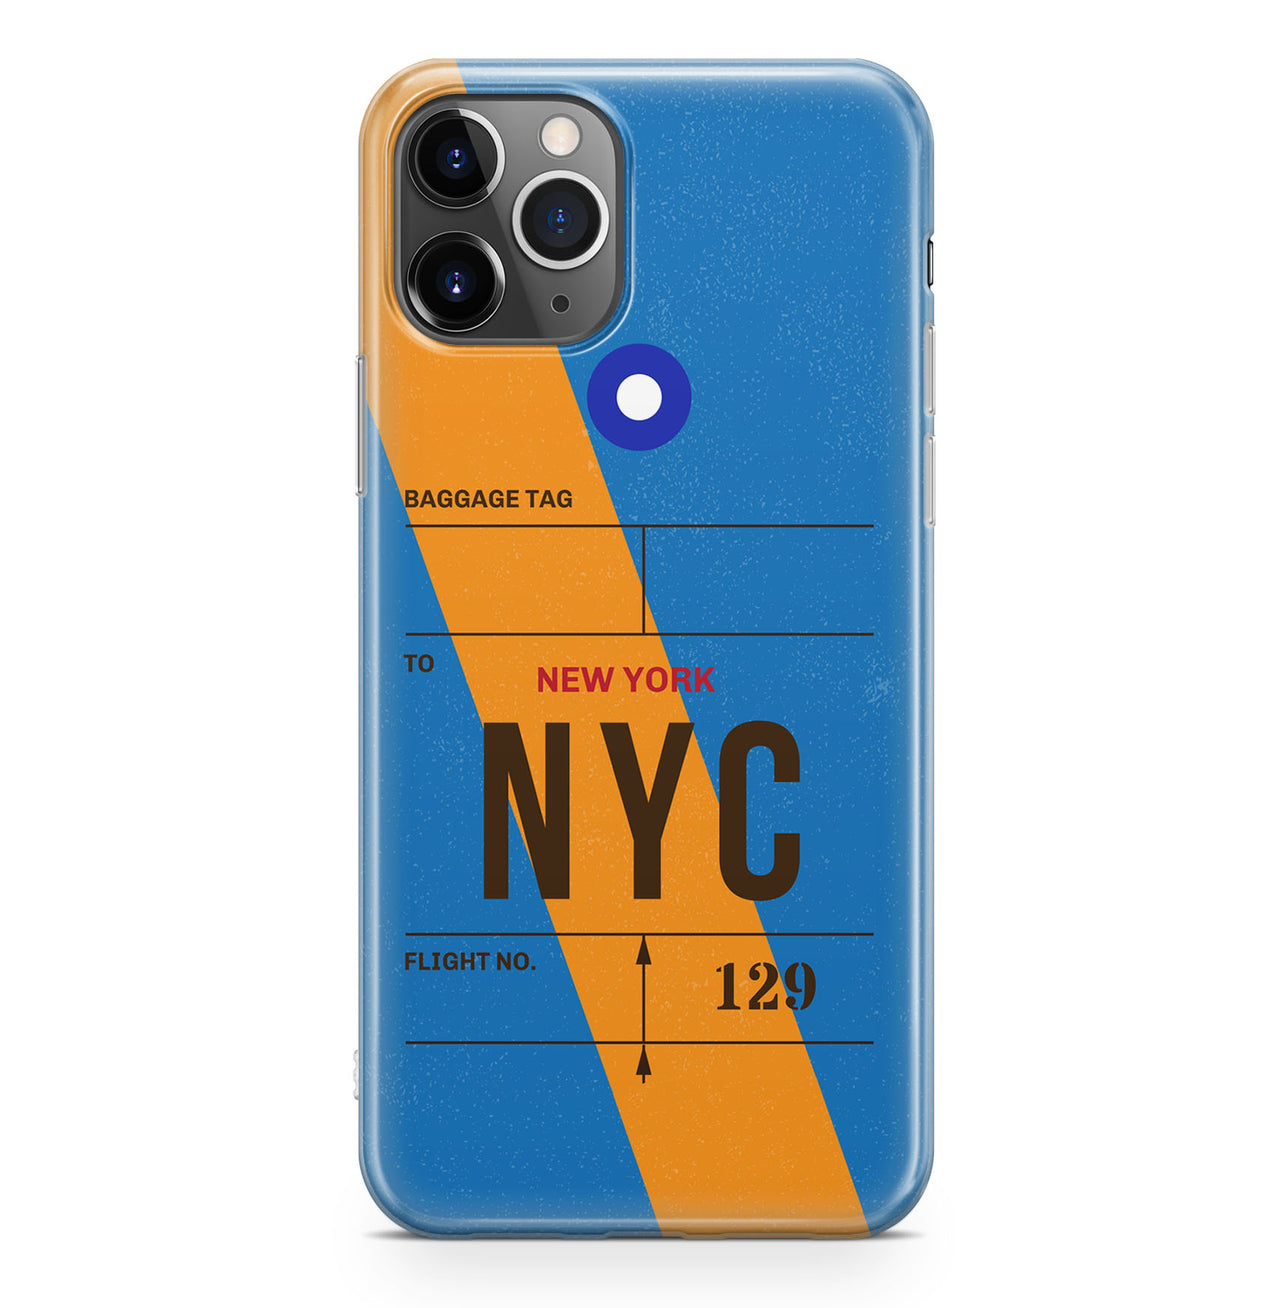 NYC - New York Luggage Tag Designed iPhone Cases